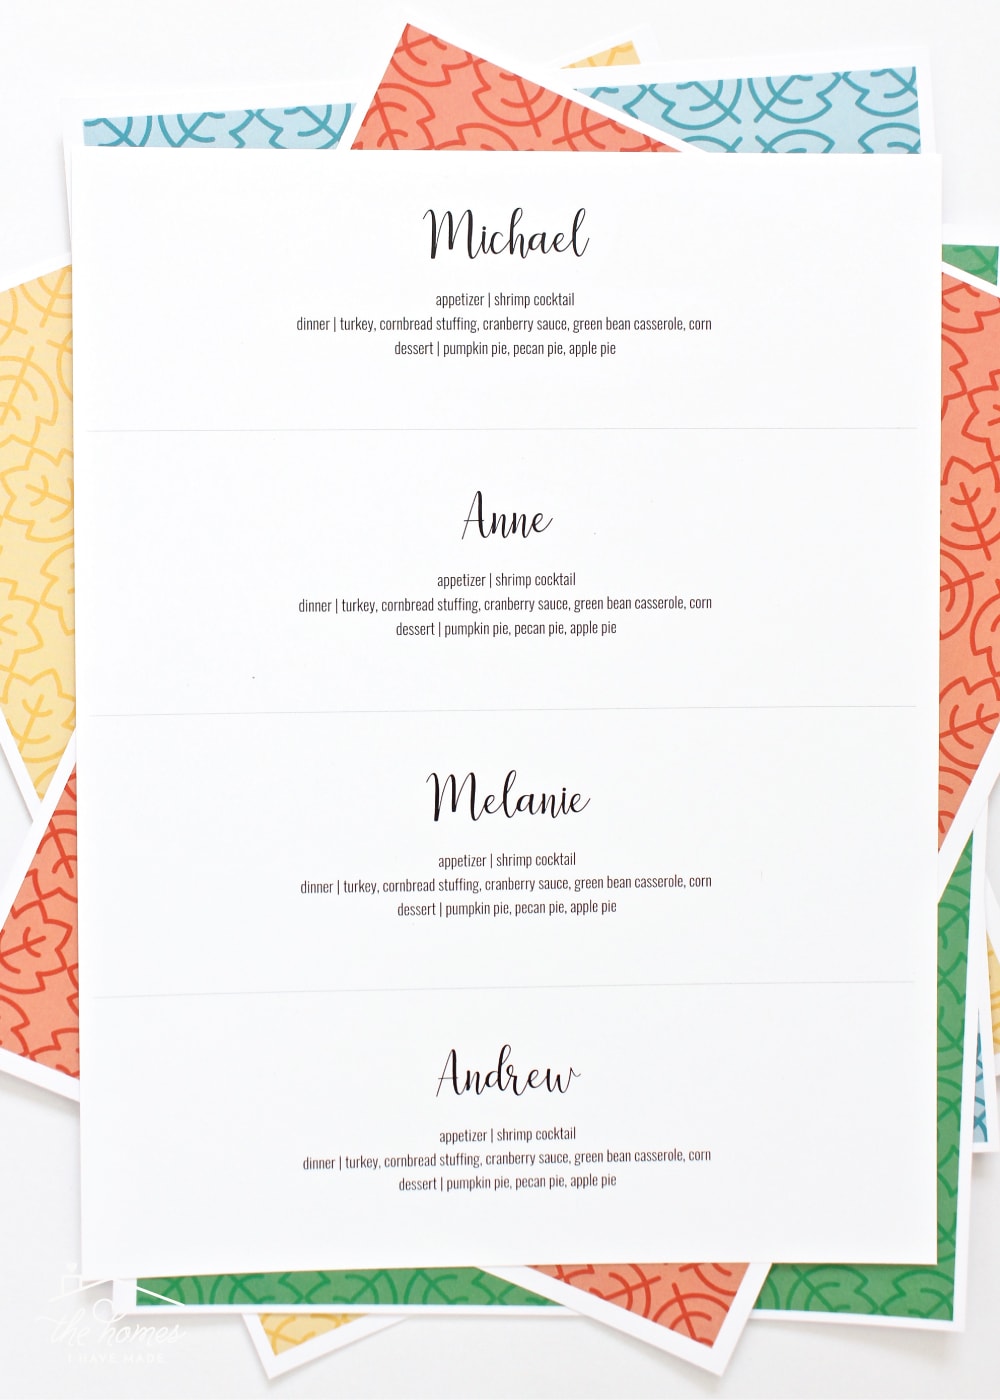 Menu-style Thanksgiving place cards (un-cut) shown with patterned papers